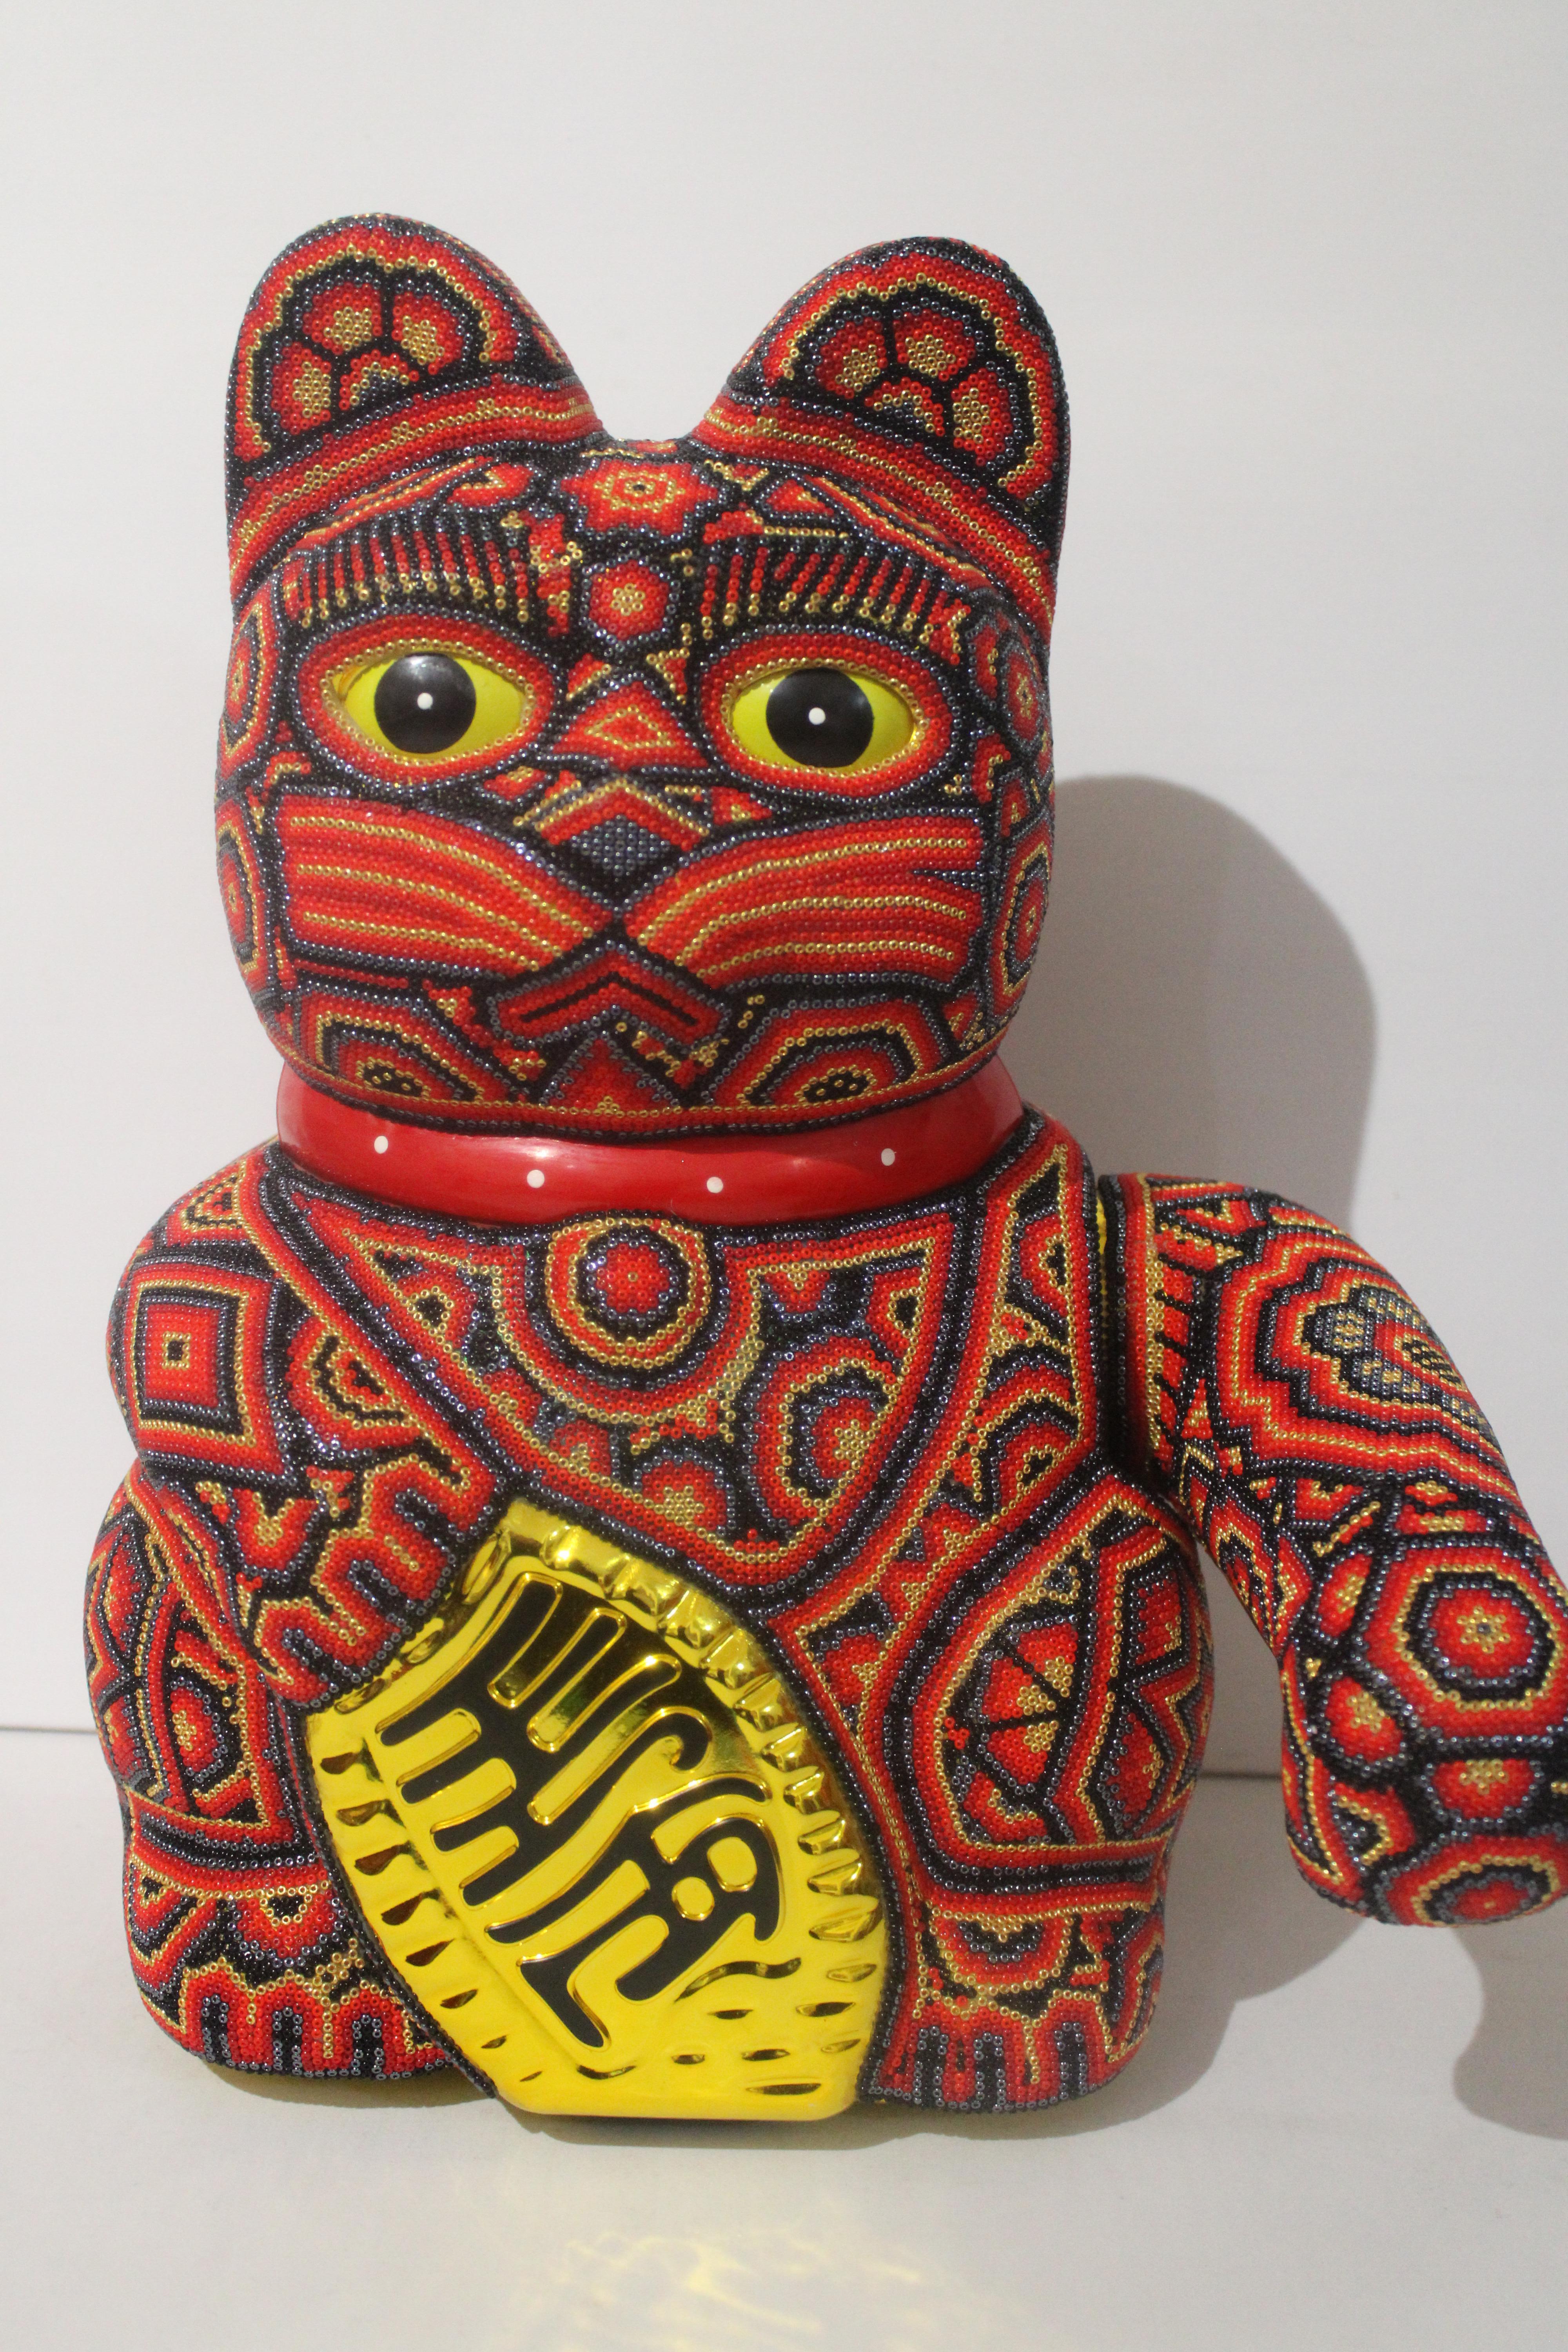 CHROMA aka Rick Wolfryd  Figurative Sculpture - Large Money Cat from Huichol ALTERATIONS Series